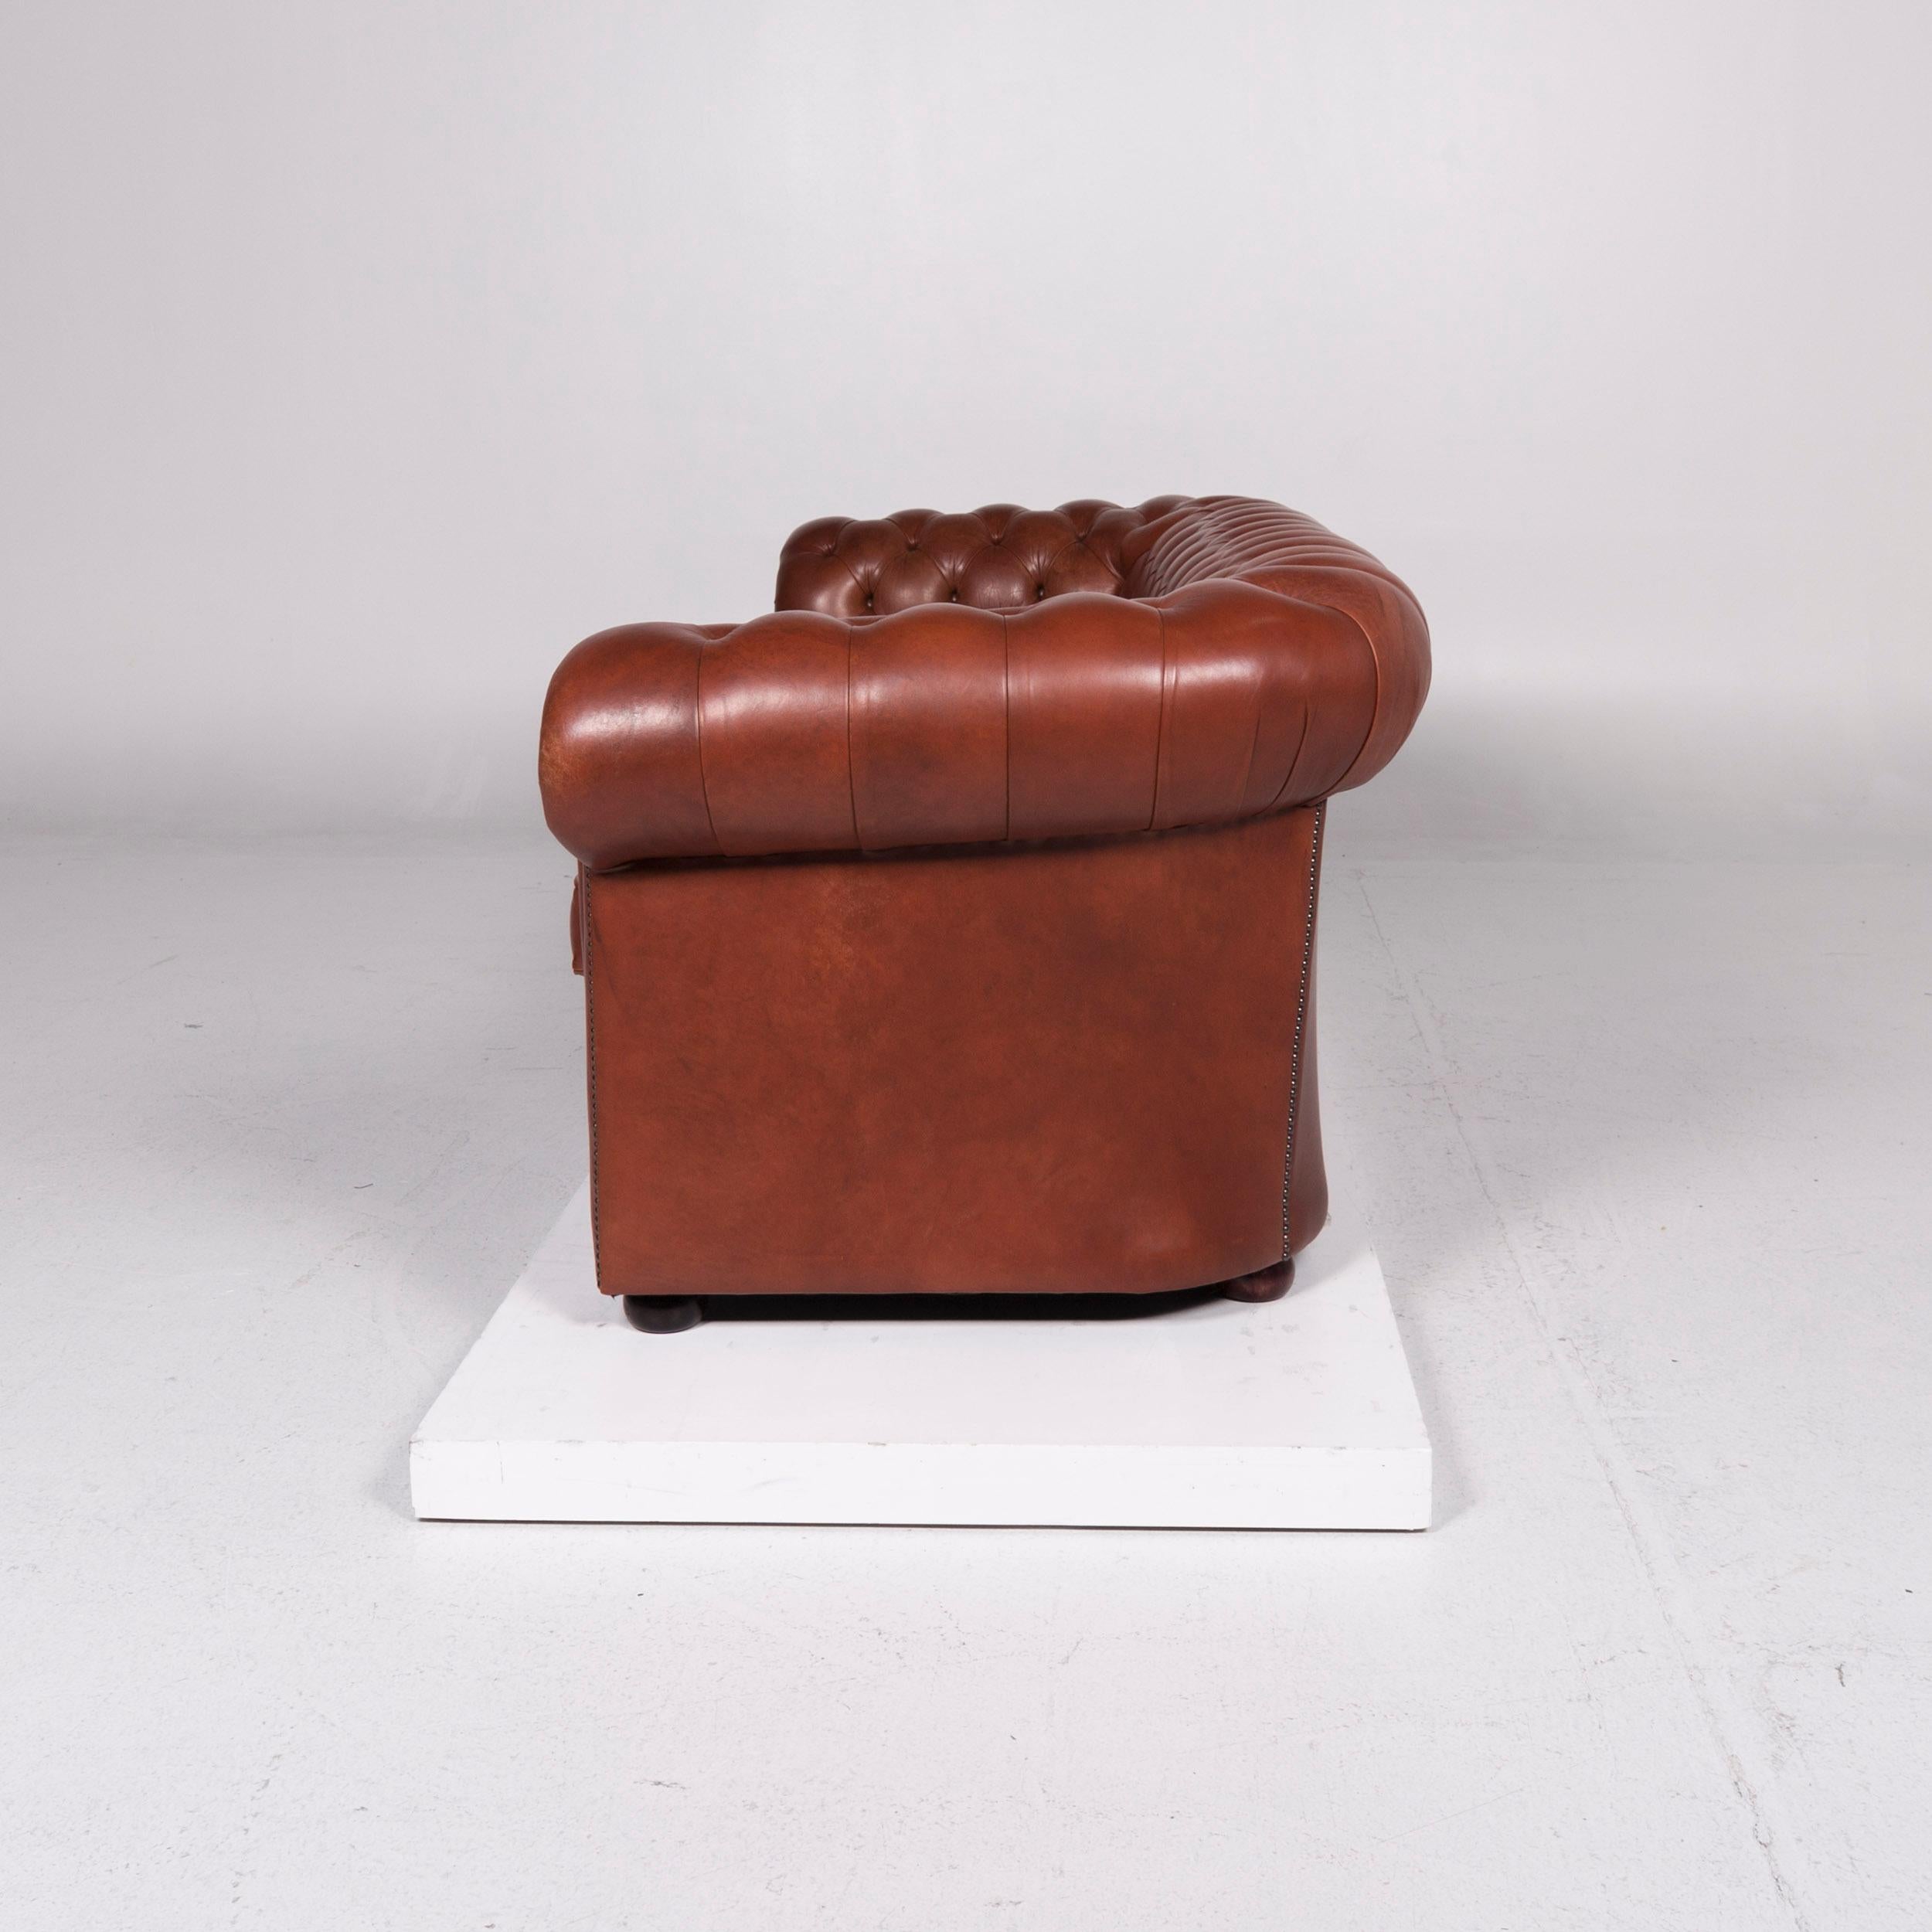 Chesterfield Leather Sofa Red Brown Three-Seat Couch Retro 1